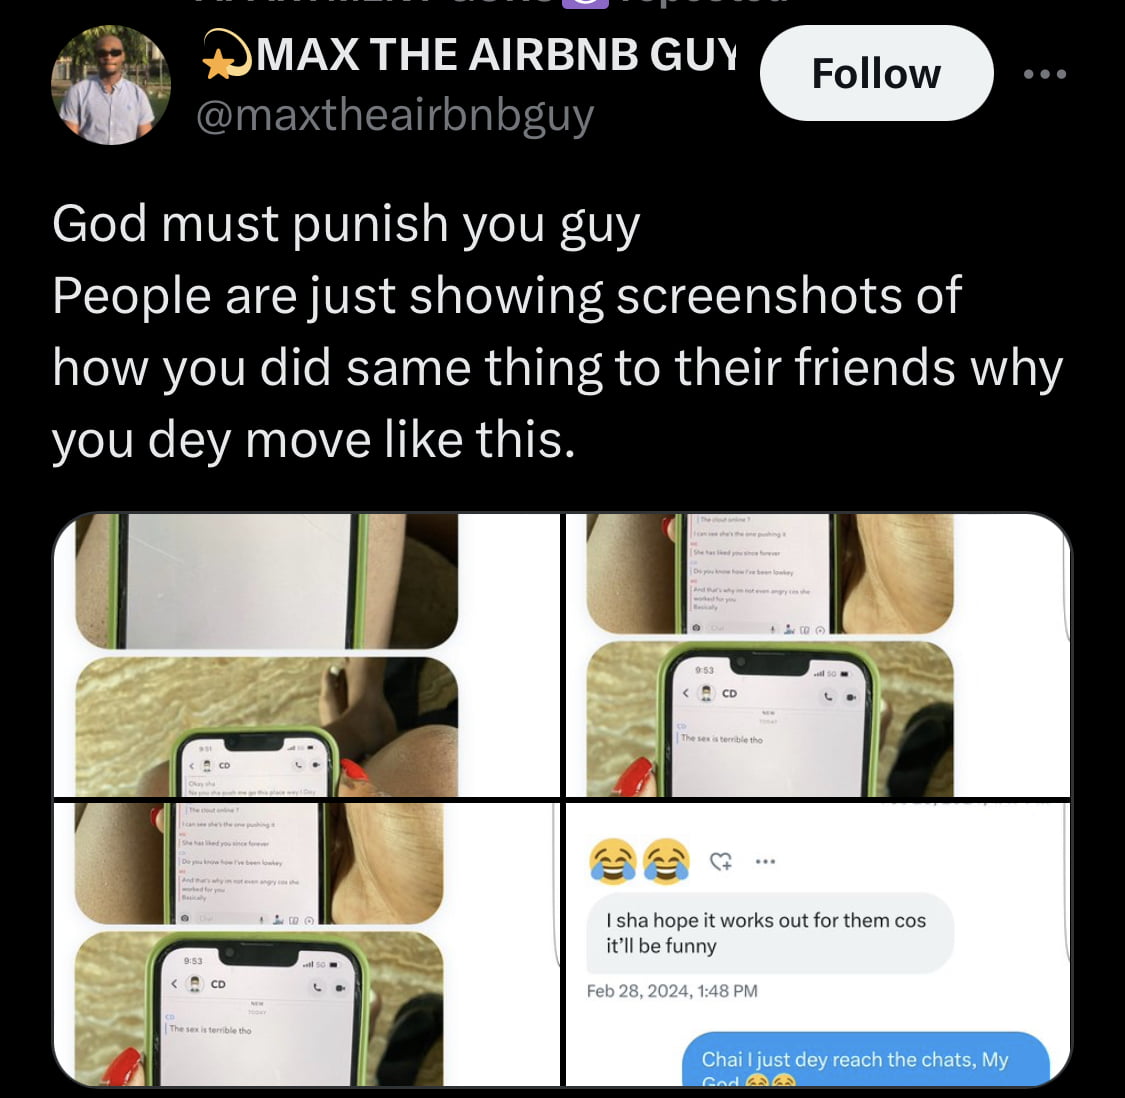 Max the Airbnb Guy provides screenshots that claim Chef Derin left his friend for Saskay. 